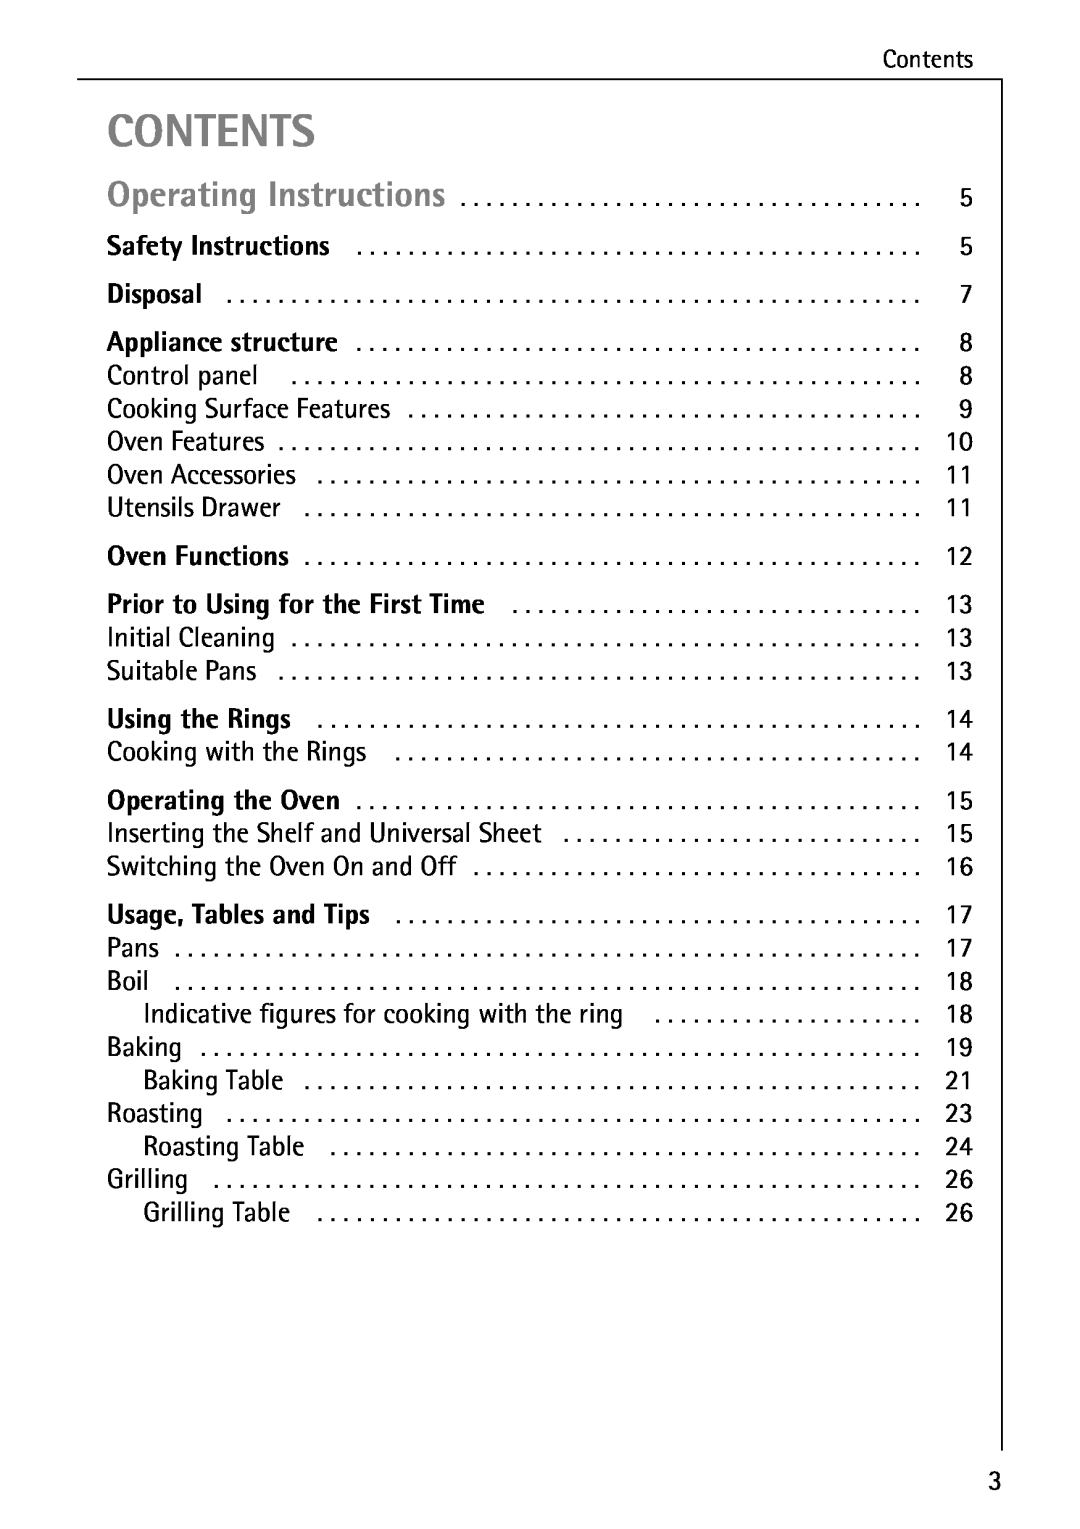 AEG 2003 F operating instructions Contents, Indicative figures for cooking with the ring 